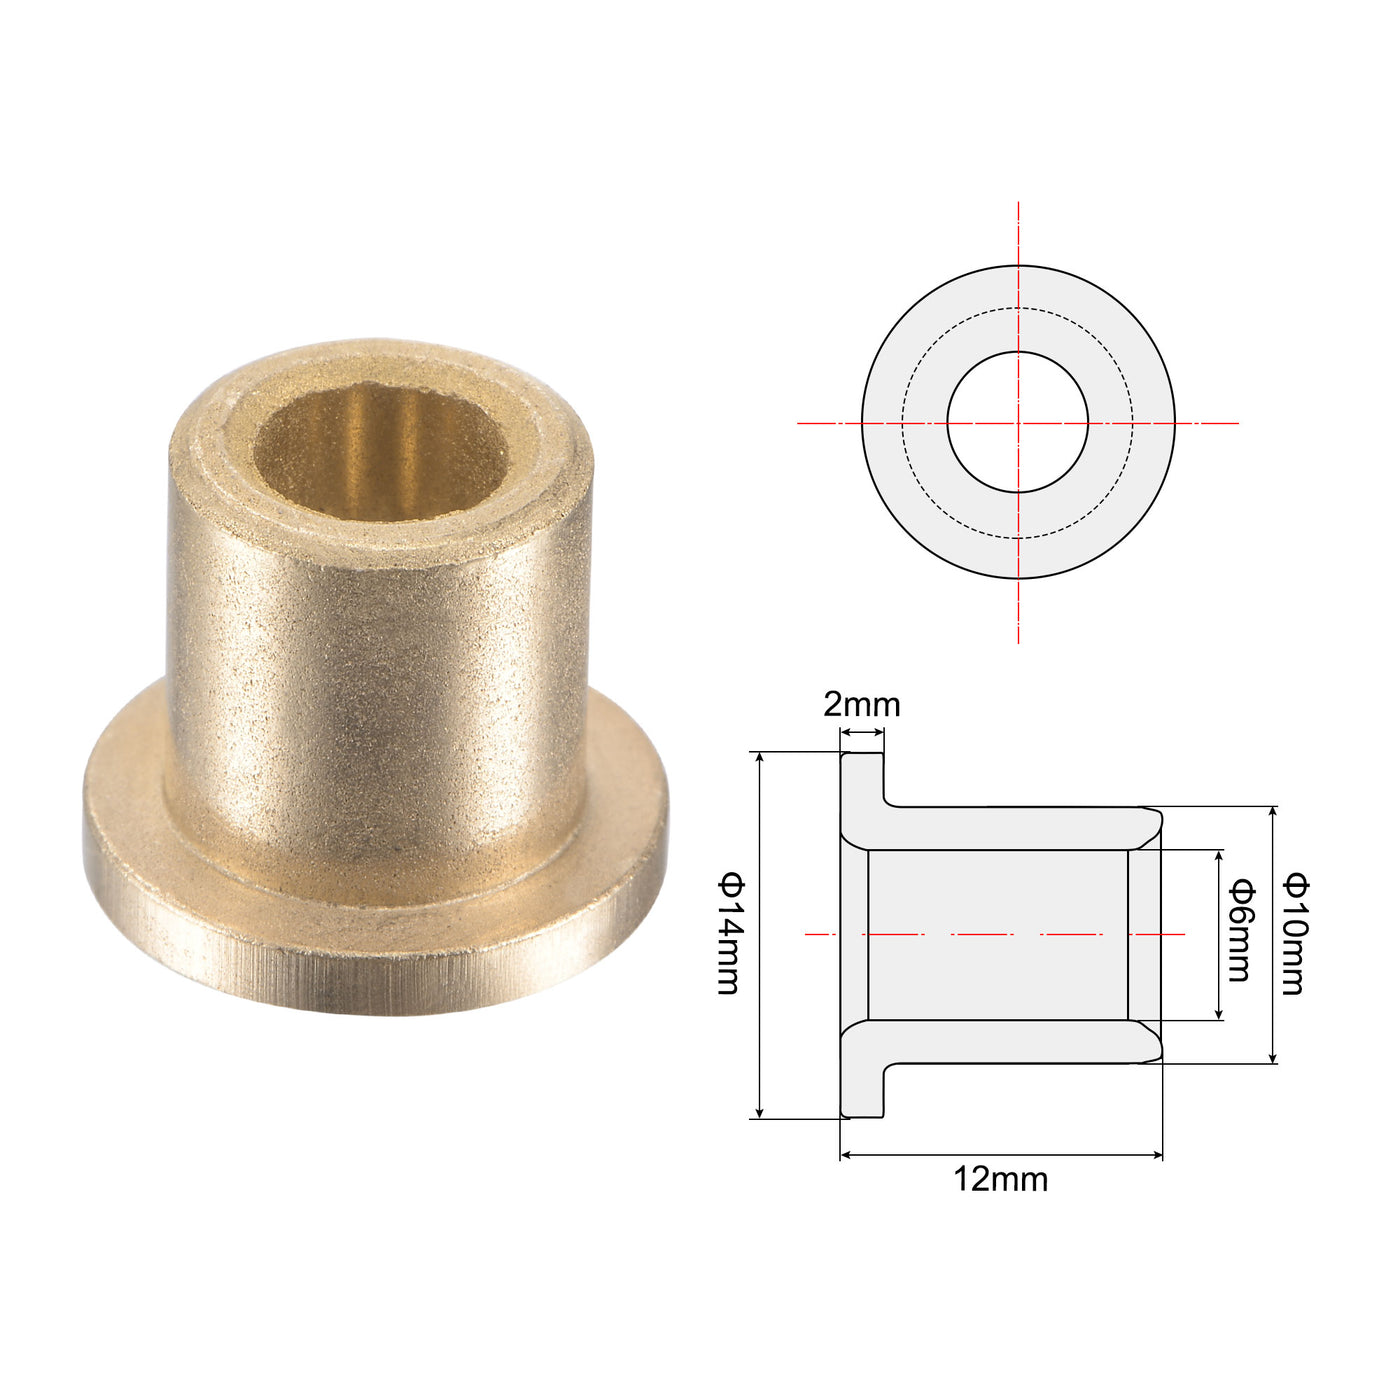 uxcell Uxcell Sintered Bronze Self-Lubricating Bushing Flanged Sleeve Bearings